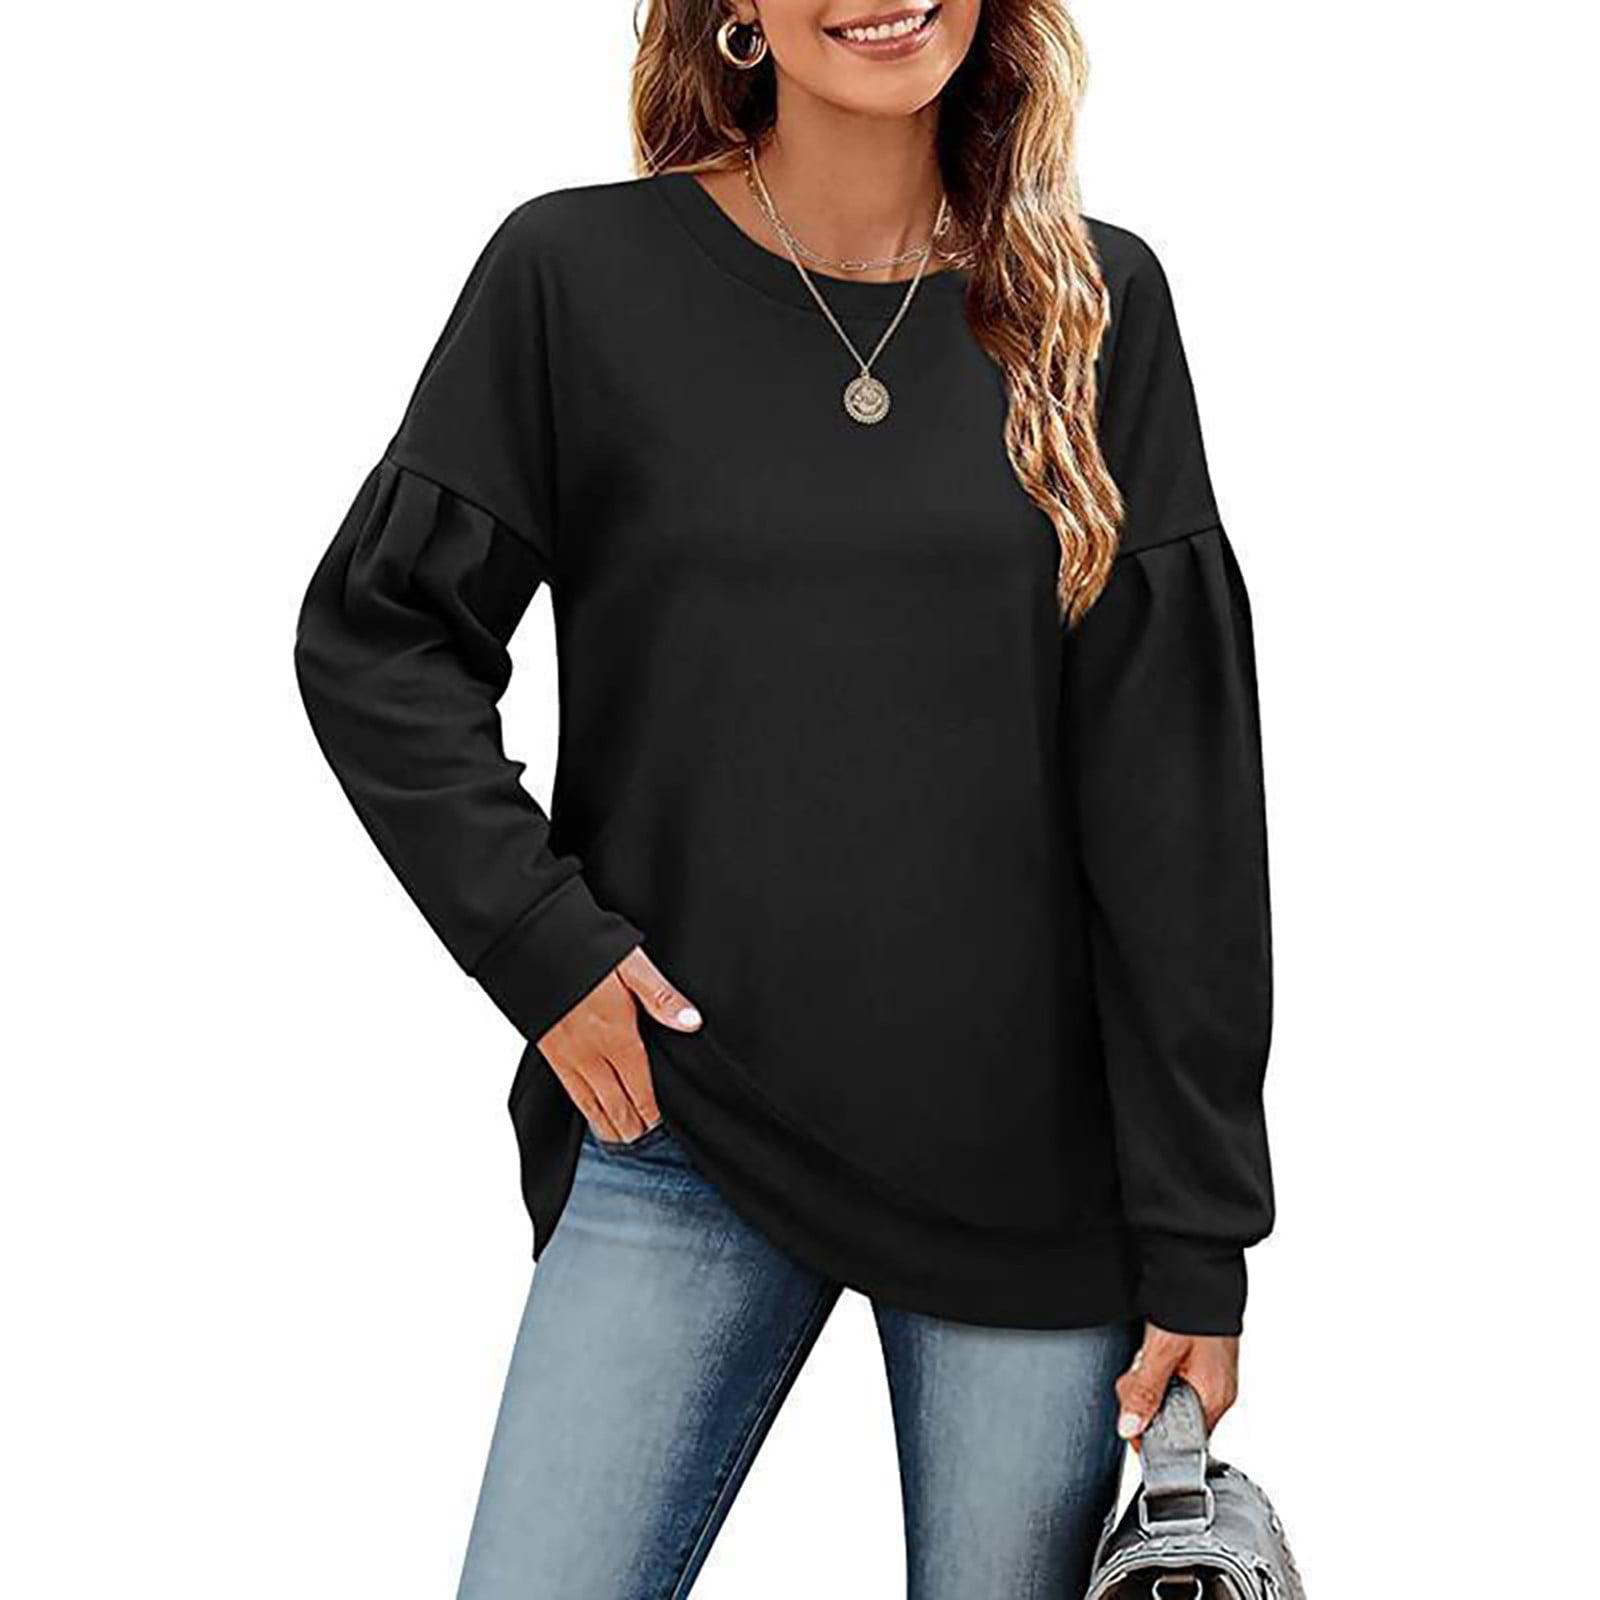 uhnmki Womens Tops Autumn and Winter Casual Fashion Round Neck Long Sleeve  Long T Shirt Top Pocket Women's Tunic Tops Black at  Women's Clothing  store